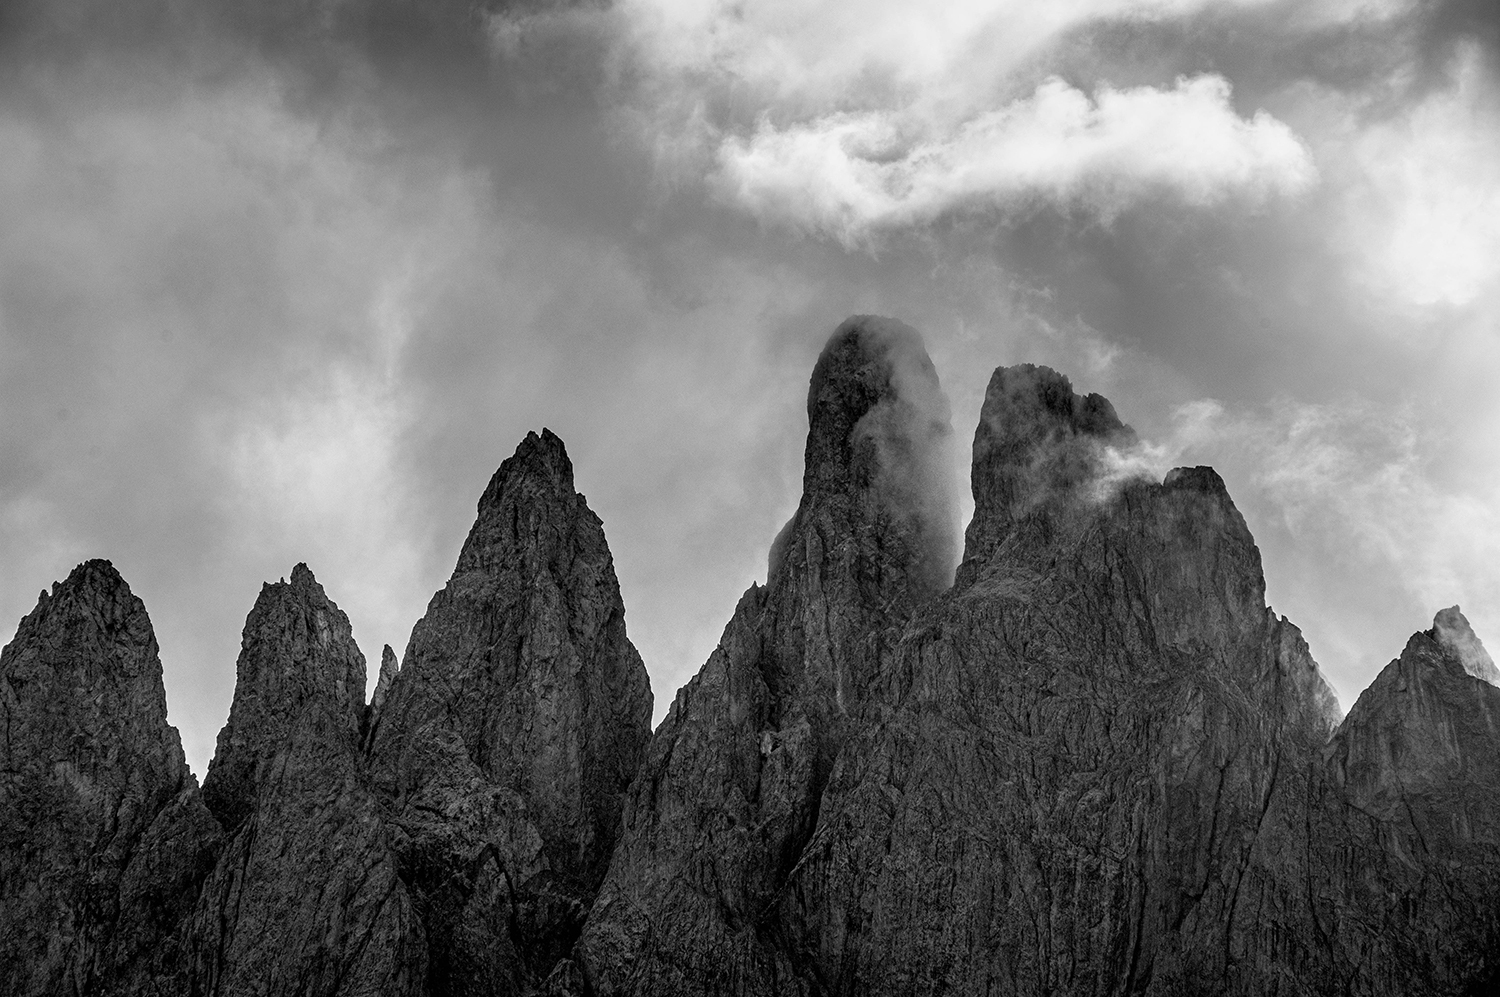 <p>A telephoto shot of the Odle group, some of the signature jagged peaks of the Dolomites. The cloud formations that whip through these teeth are a spectacle to behold.</p>